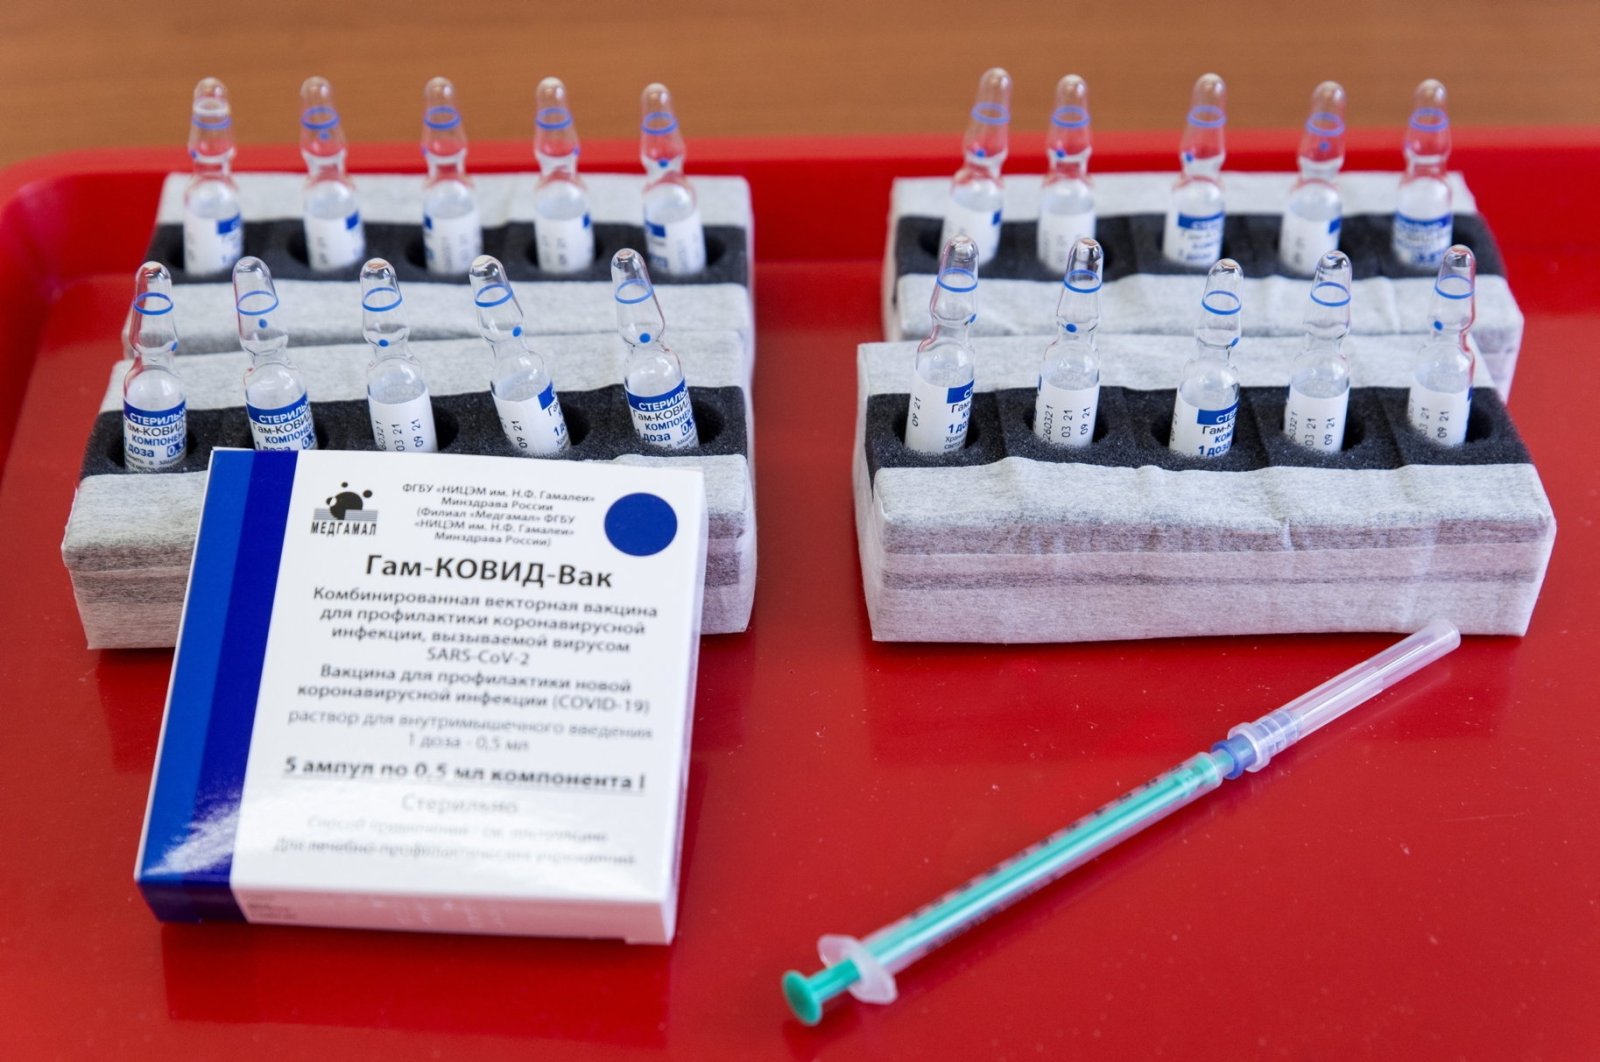 Vials of the Russian Sputnik V vaccine are displayed at a hospital in Gyor, Hungary, April 18, 2021. (EPA PHOTO)